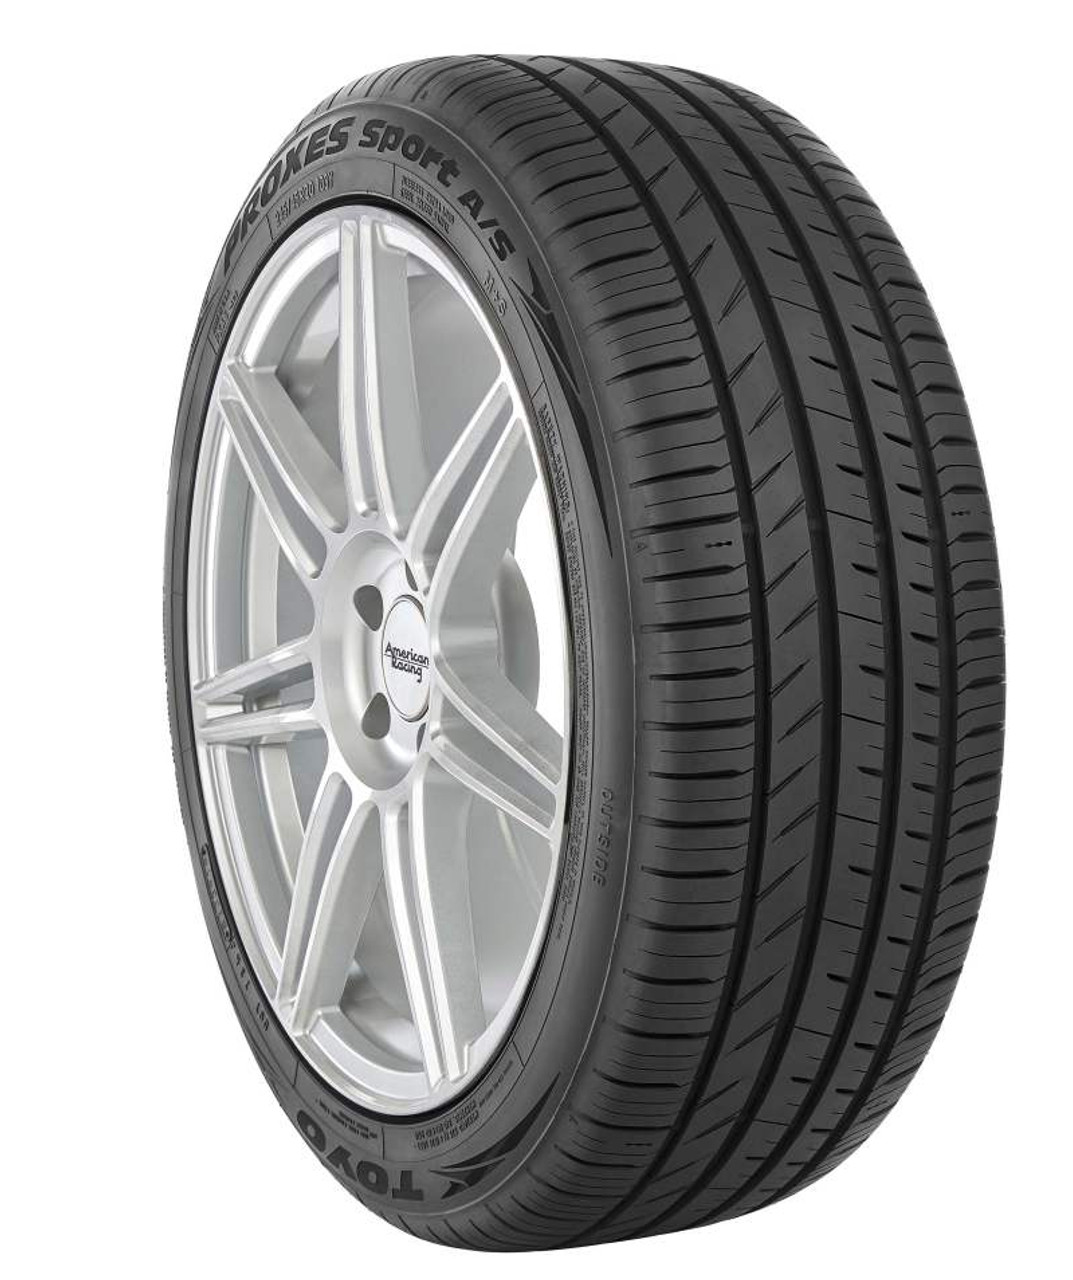 Toyo Proxes A/S Tire 255/30R19 91Y XL Down East Offroad